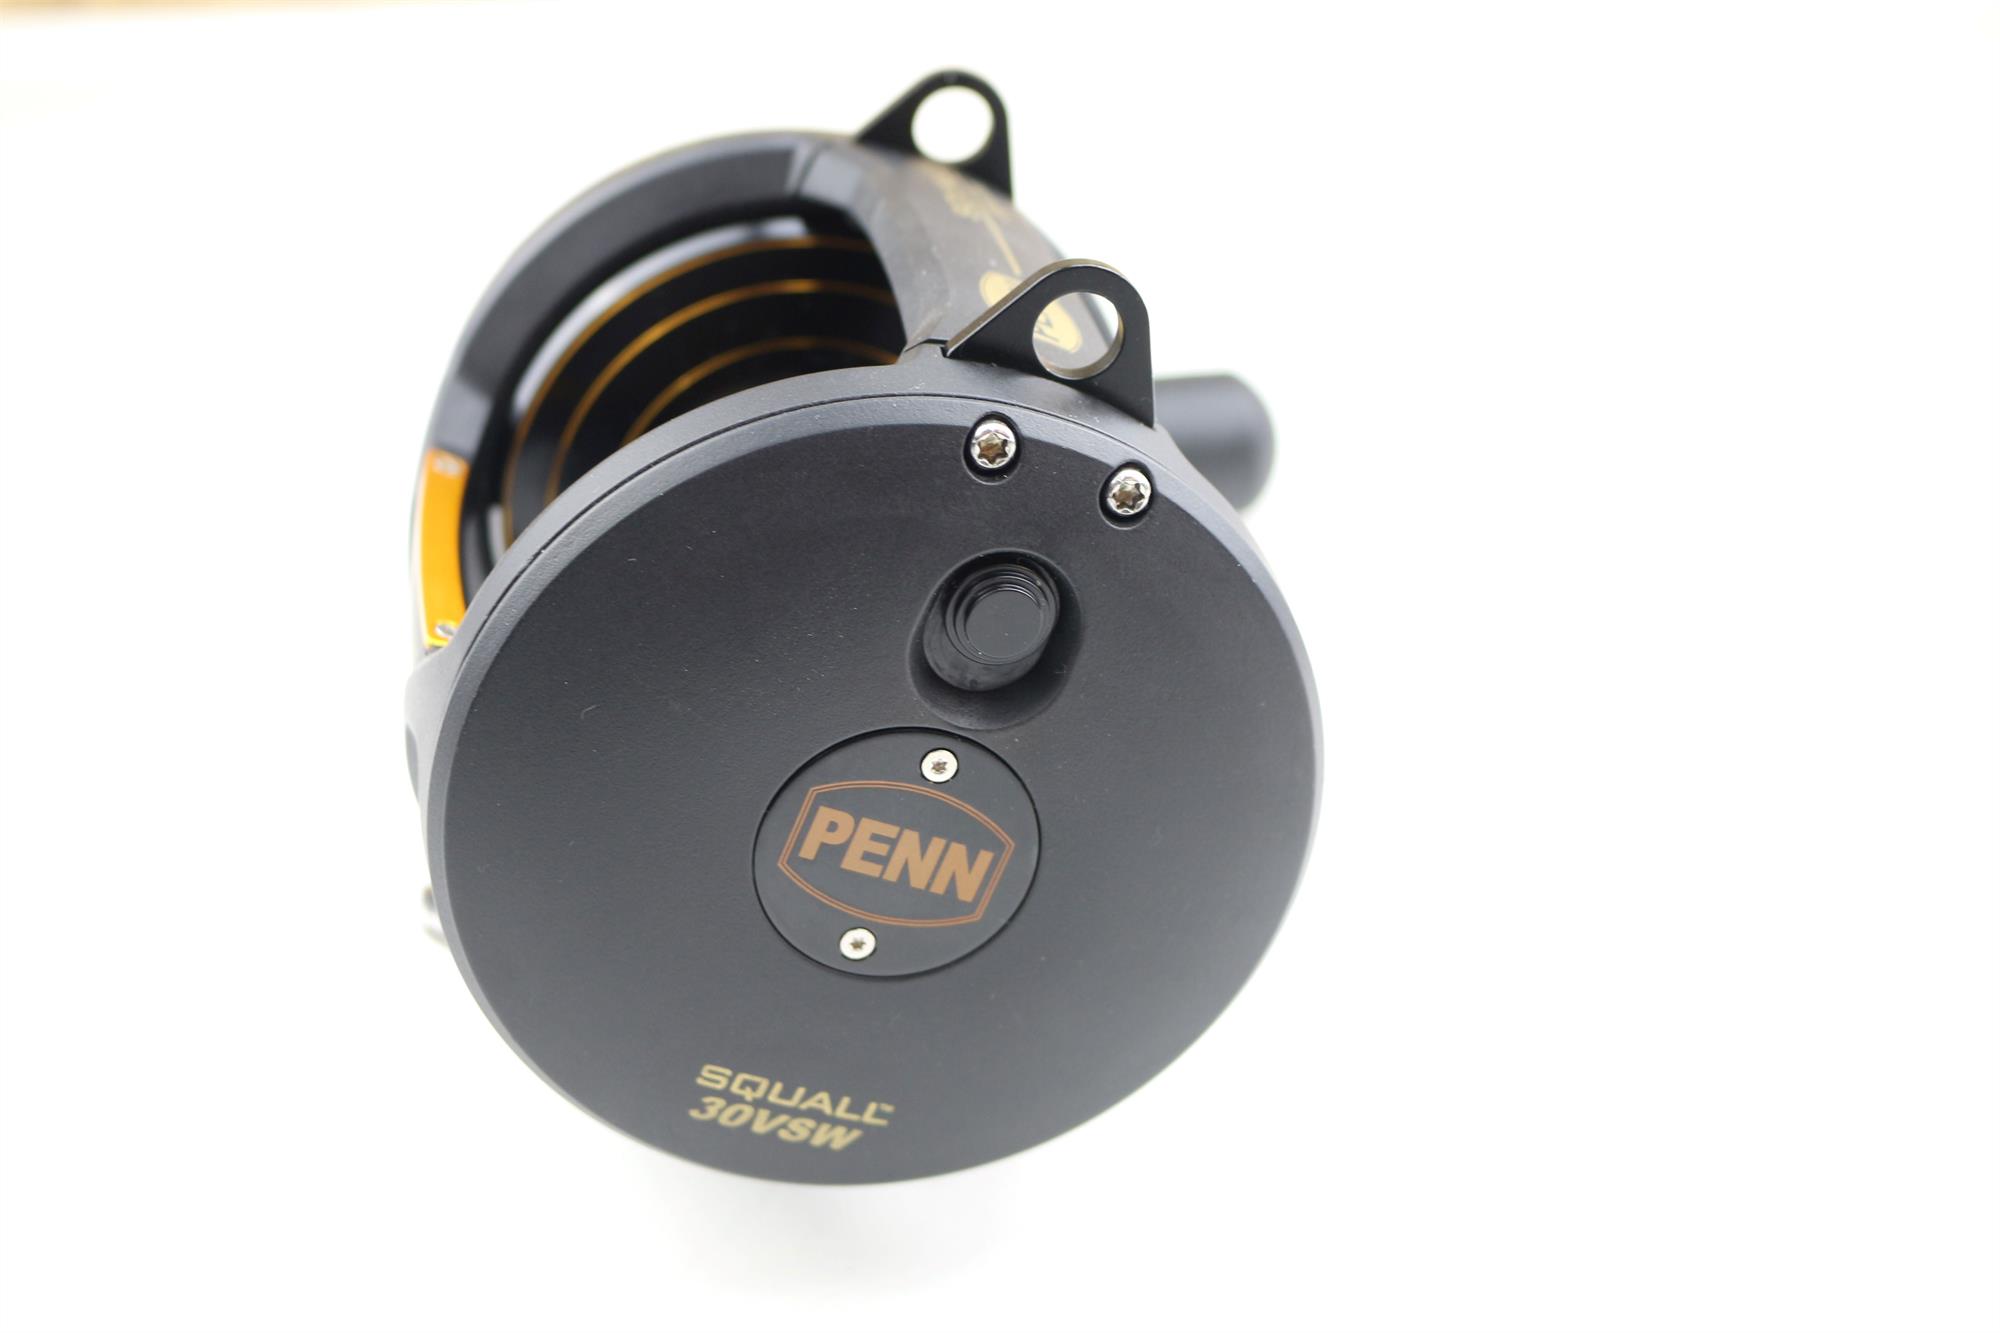 PENN Saltwater Game Fishing Conventional Lever Drag 2 Speed Reel SQUALL  30VSW